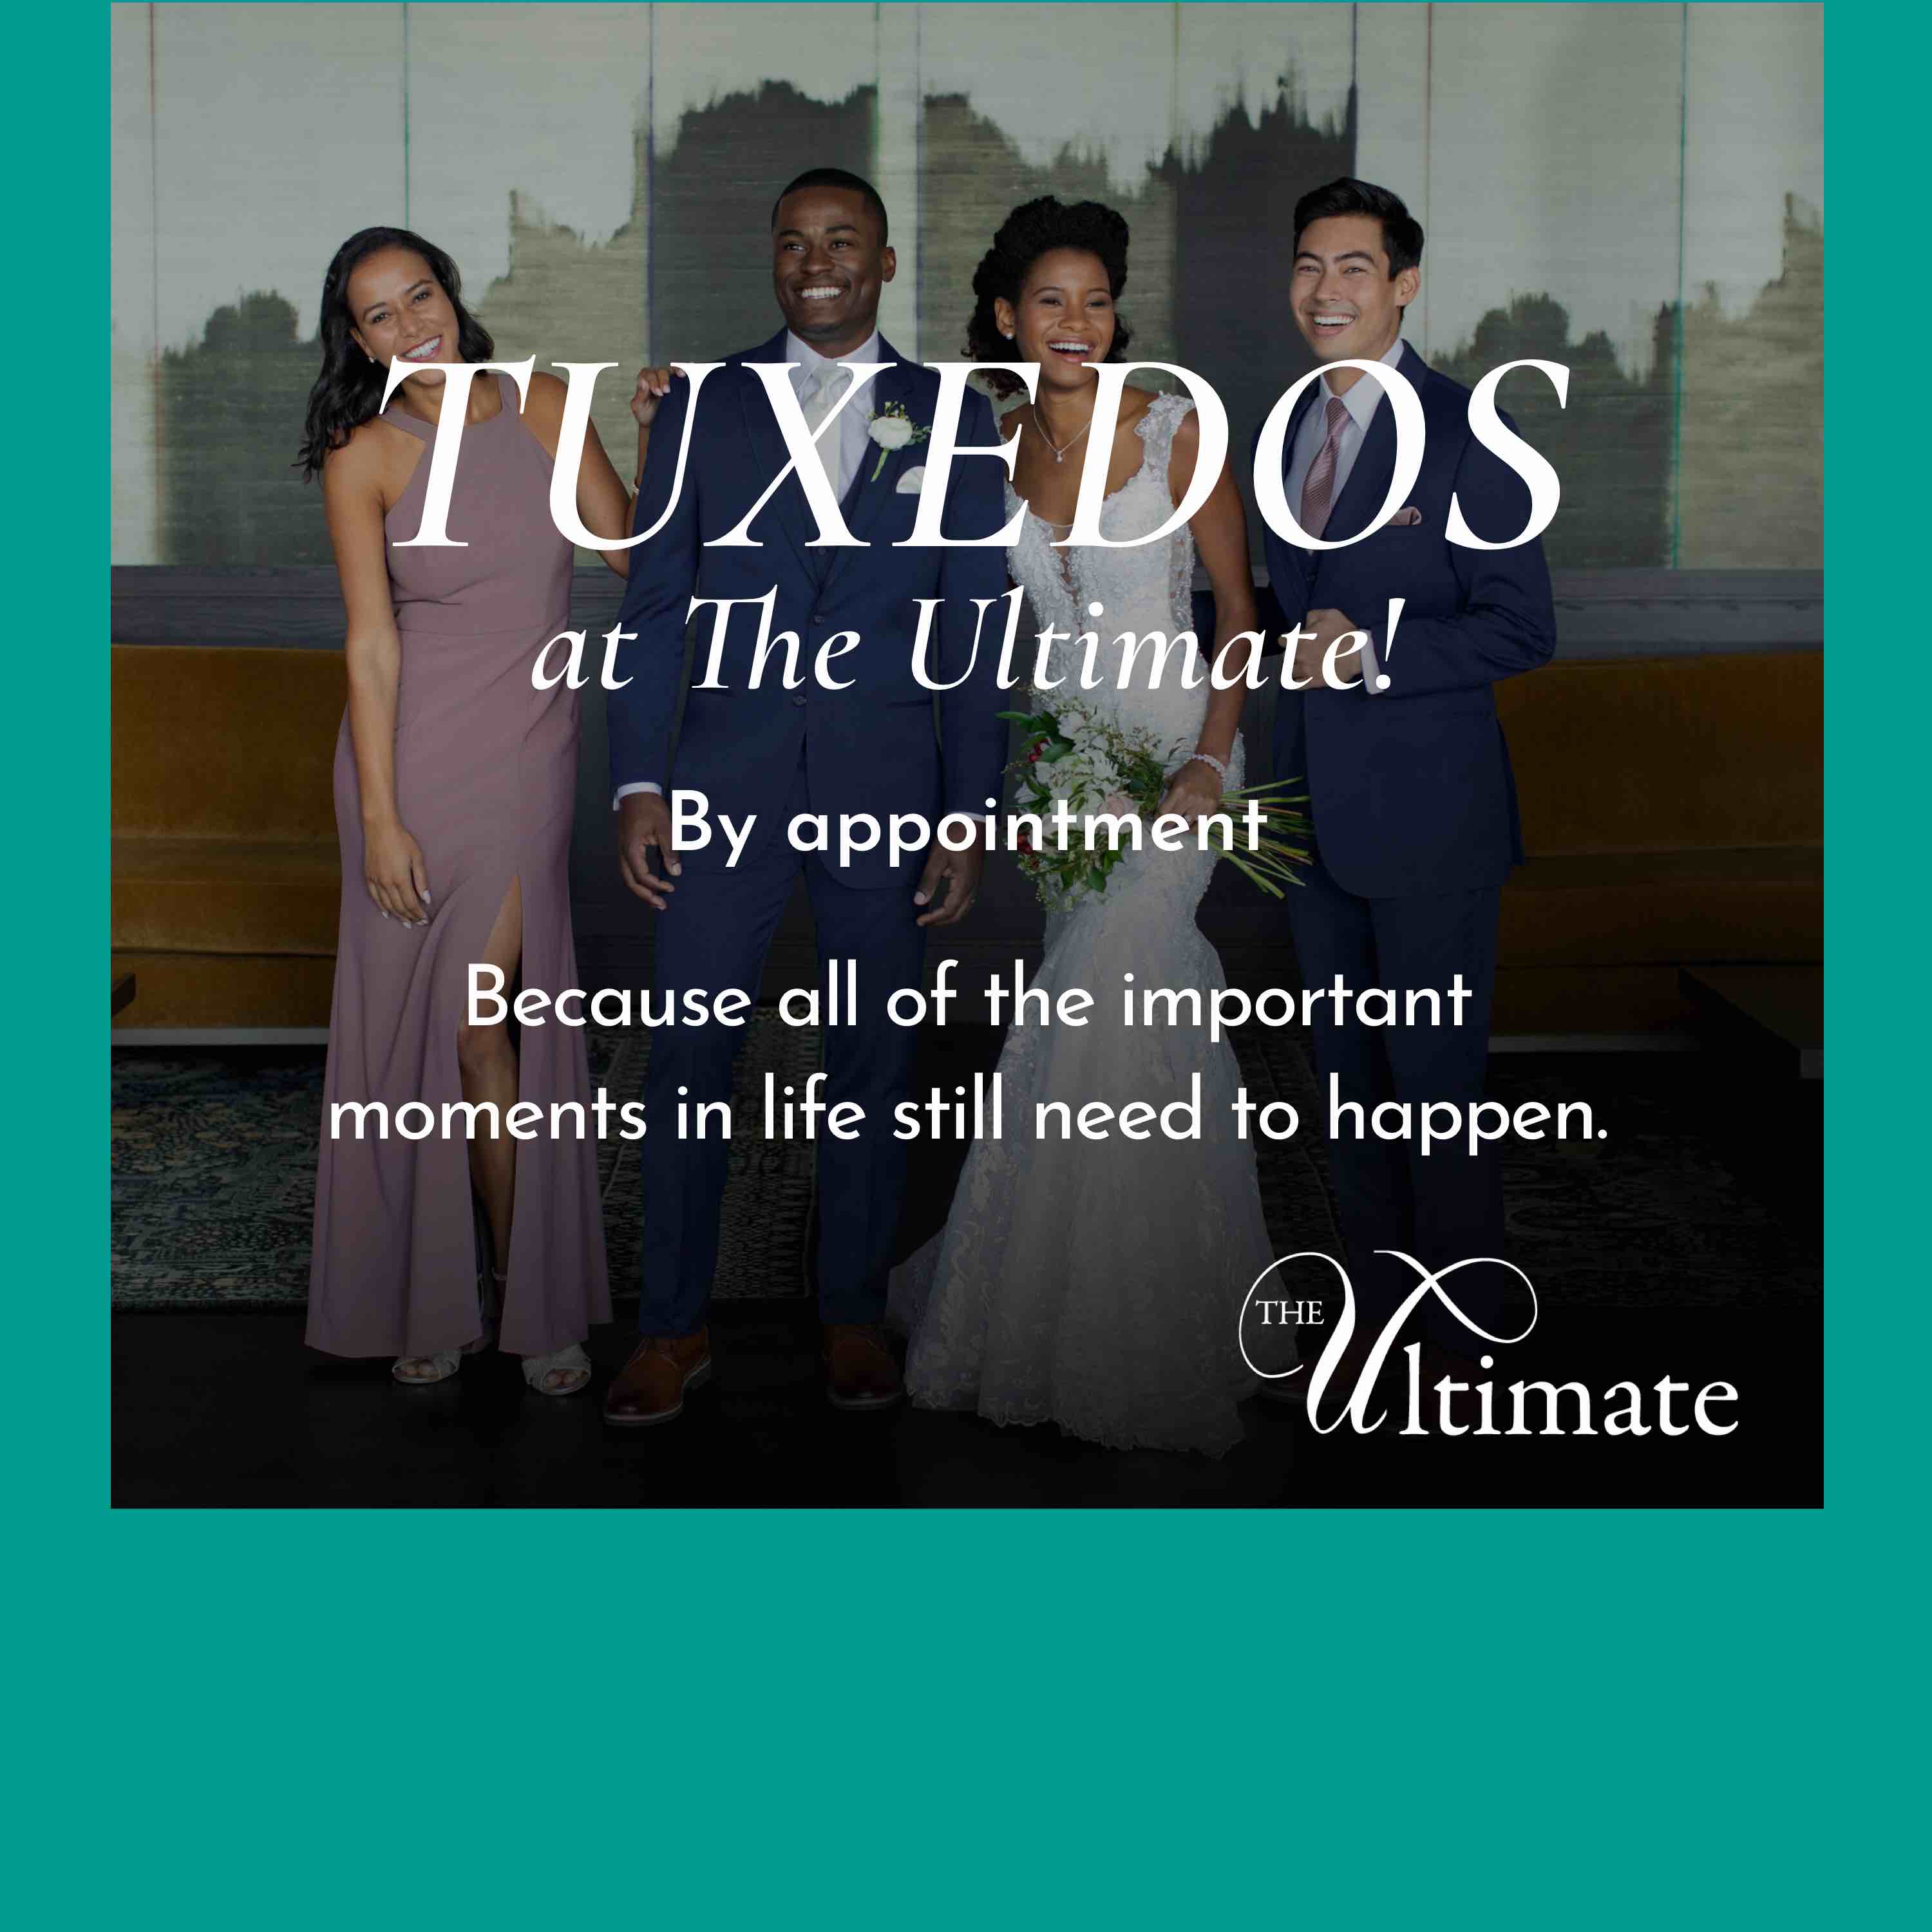 Tuxedos at The Ultimate